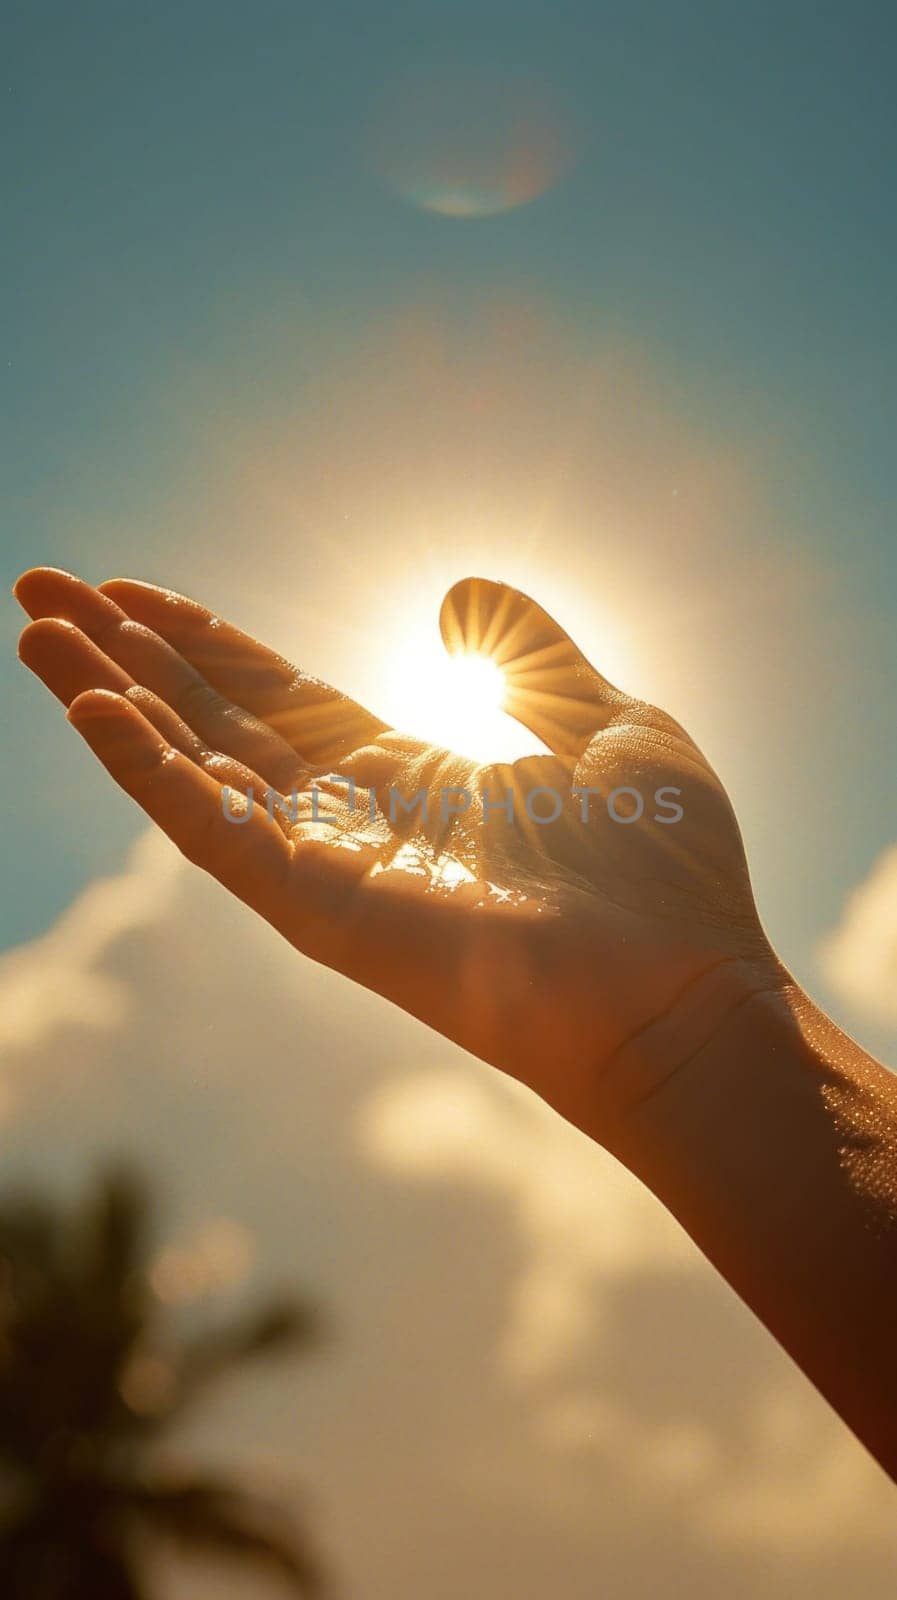 A person reaching their hand towards the sun in the sky.